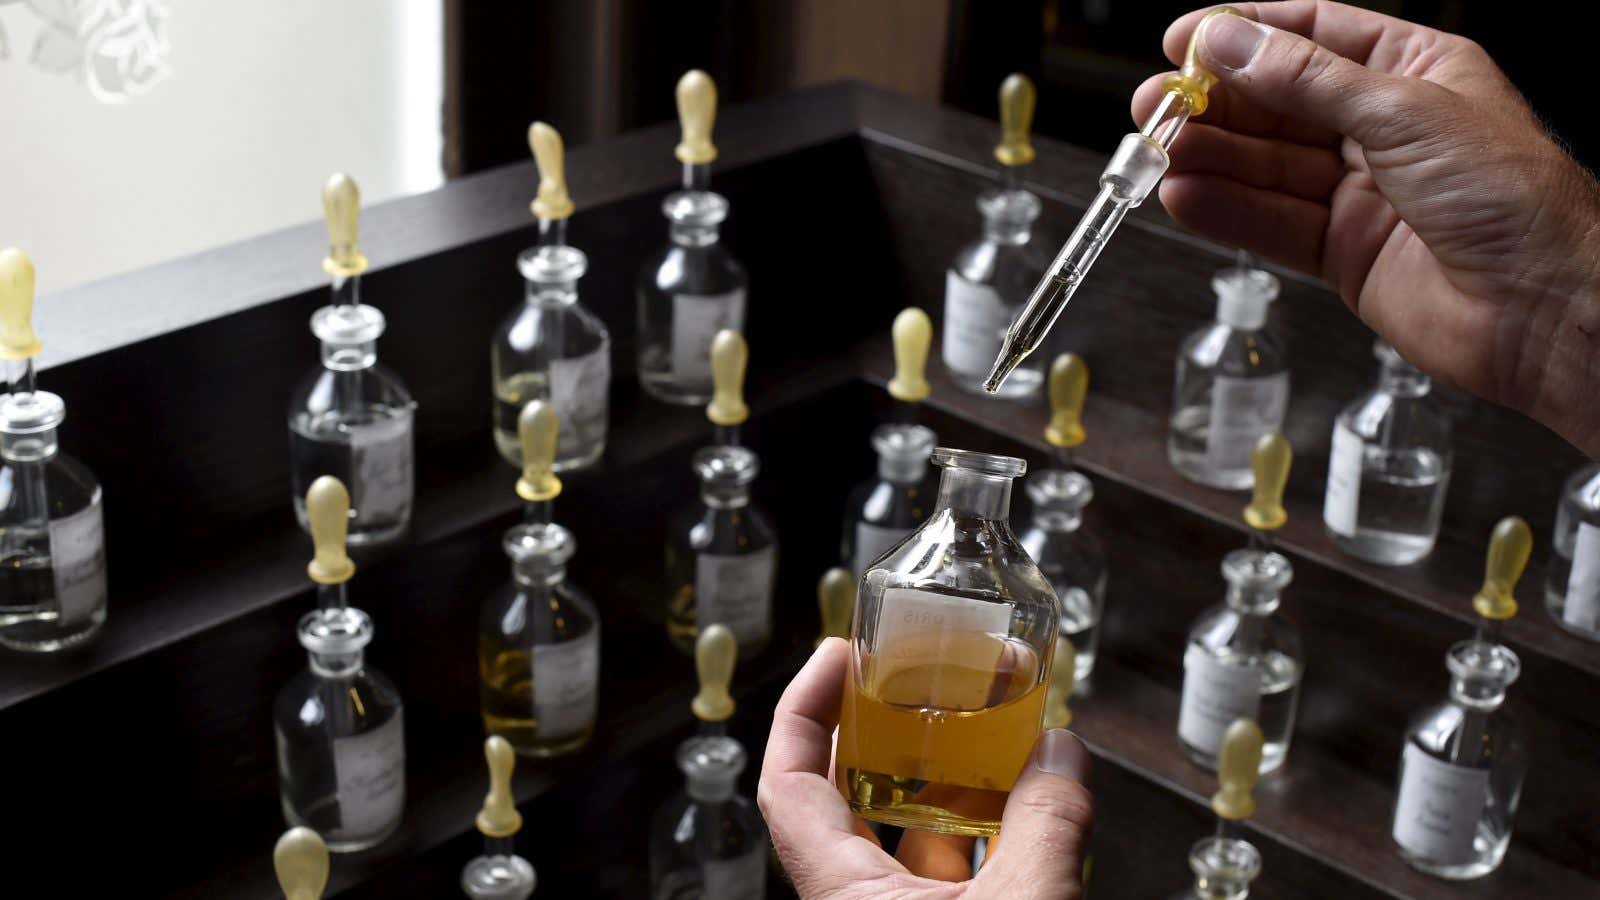 How is perfume made, and where are the ingredients sourced?